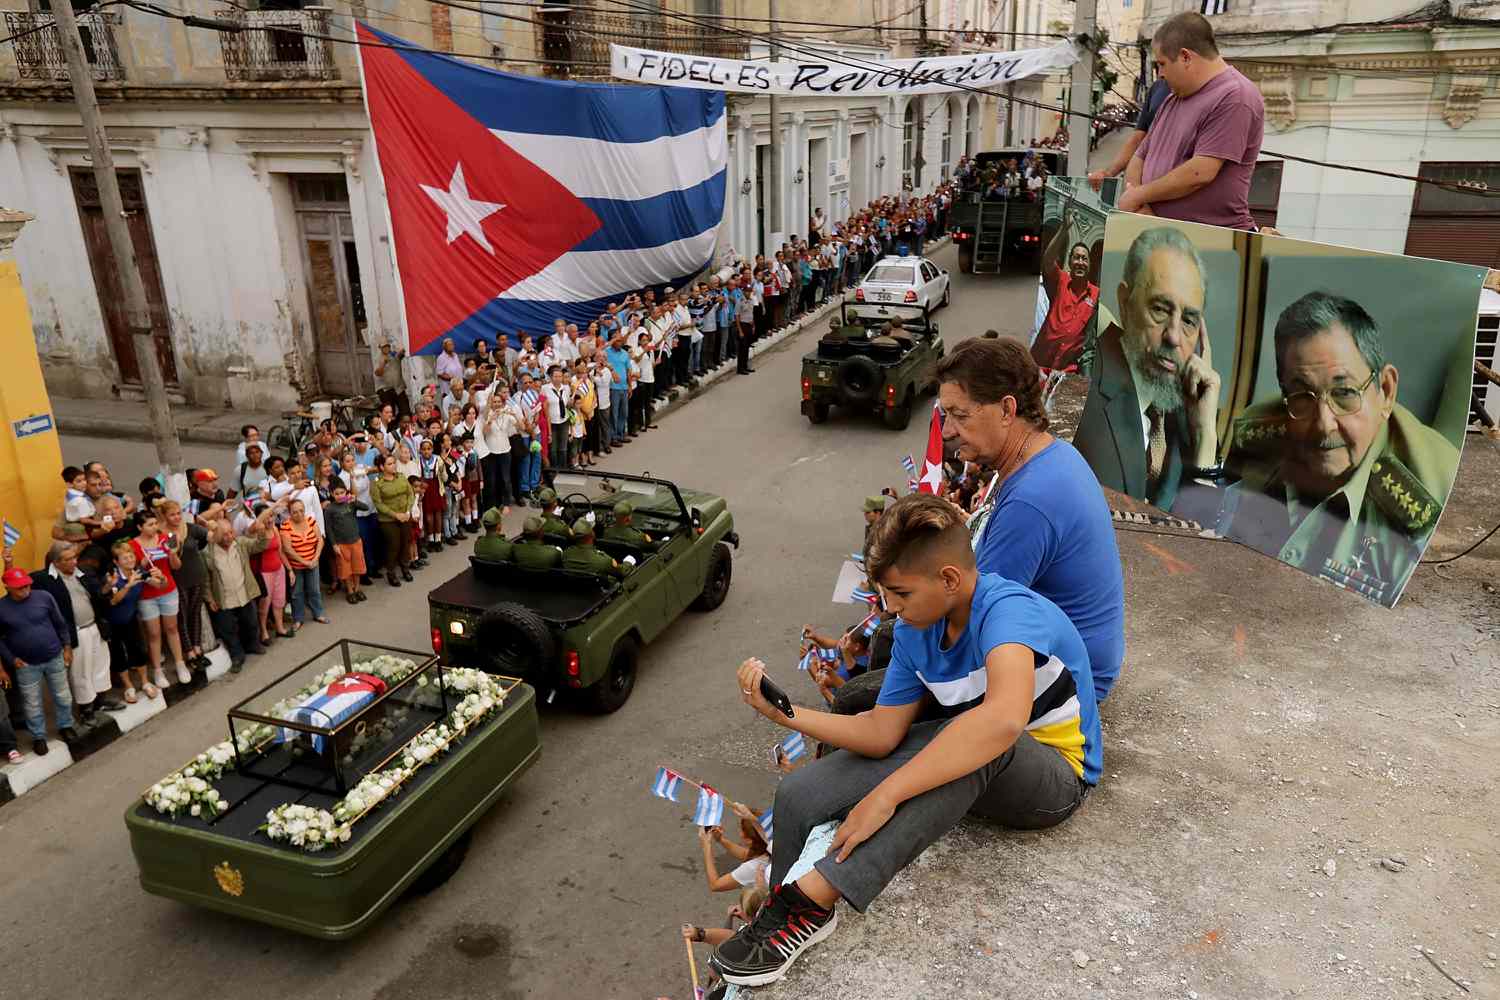 SANTA CLARA, CUBA - DECEMBER 01:  People sit on their rooftop to get a better view as the remains of former Cuban President Fidel Castro pass by on their cross-country journey from Havana to Santiago de Cuba on December 1, 2016 in Santa Clara, Cuba. Castro, the revolutionary leader who brought communism to his island nation in 1959, died November 25 at the age 90 years old.  (Photo by Chip Somodevilla/Getty Images)